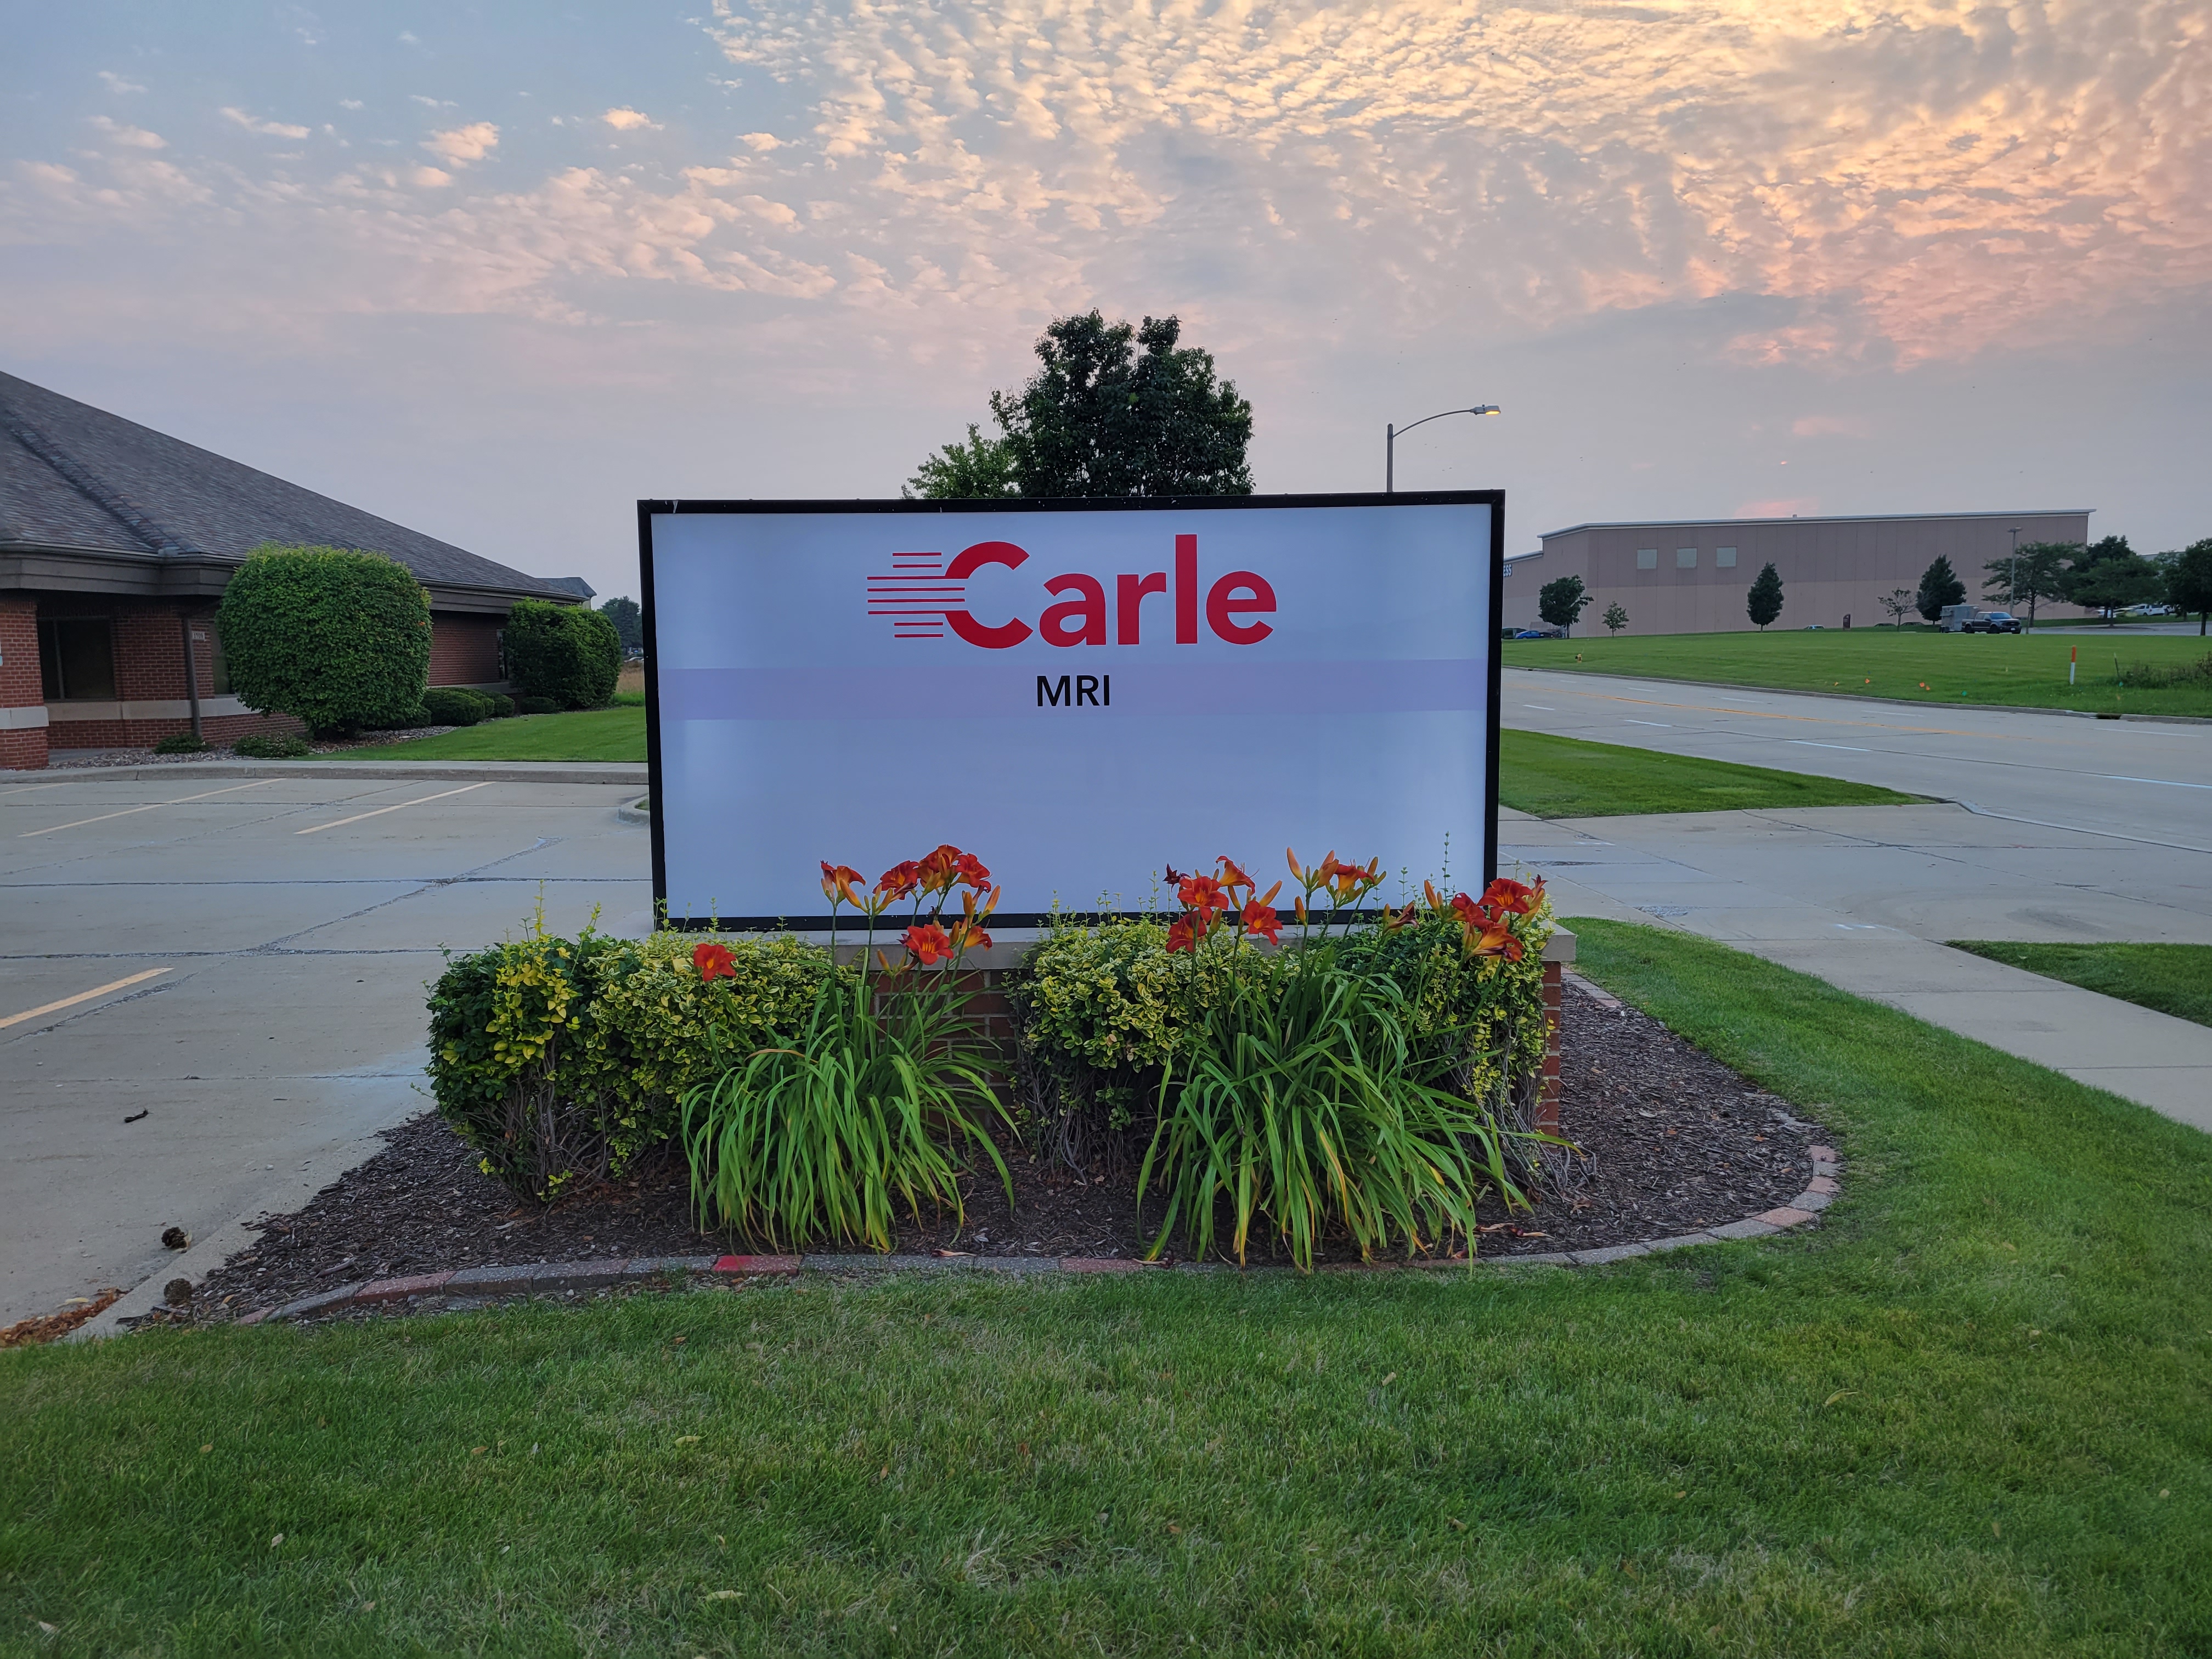 Carle MRI a new option for outpatient imaging services from Carle Health